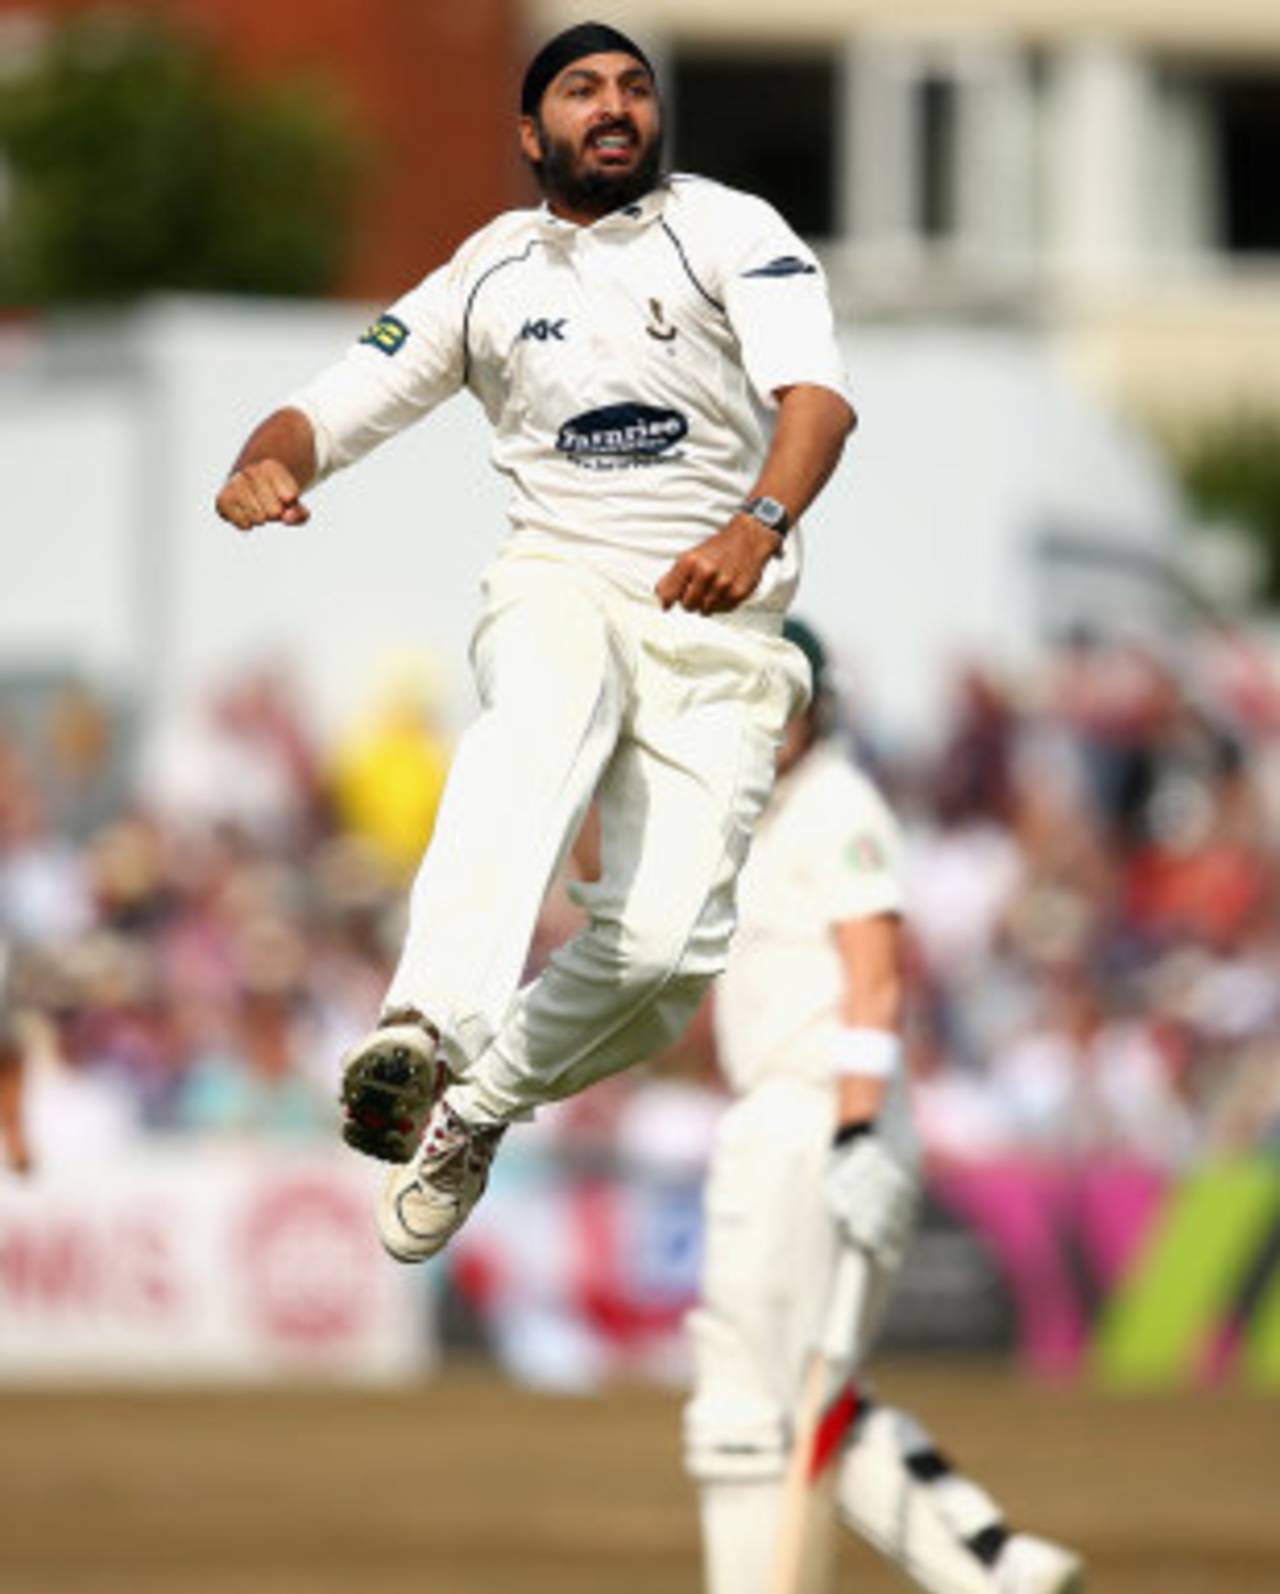 Monty Panesar enjoys one of his wickets, Sussex v Australians, Tour match, Hove, 1st day, July 26, 2013